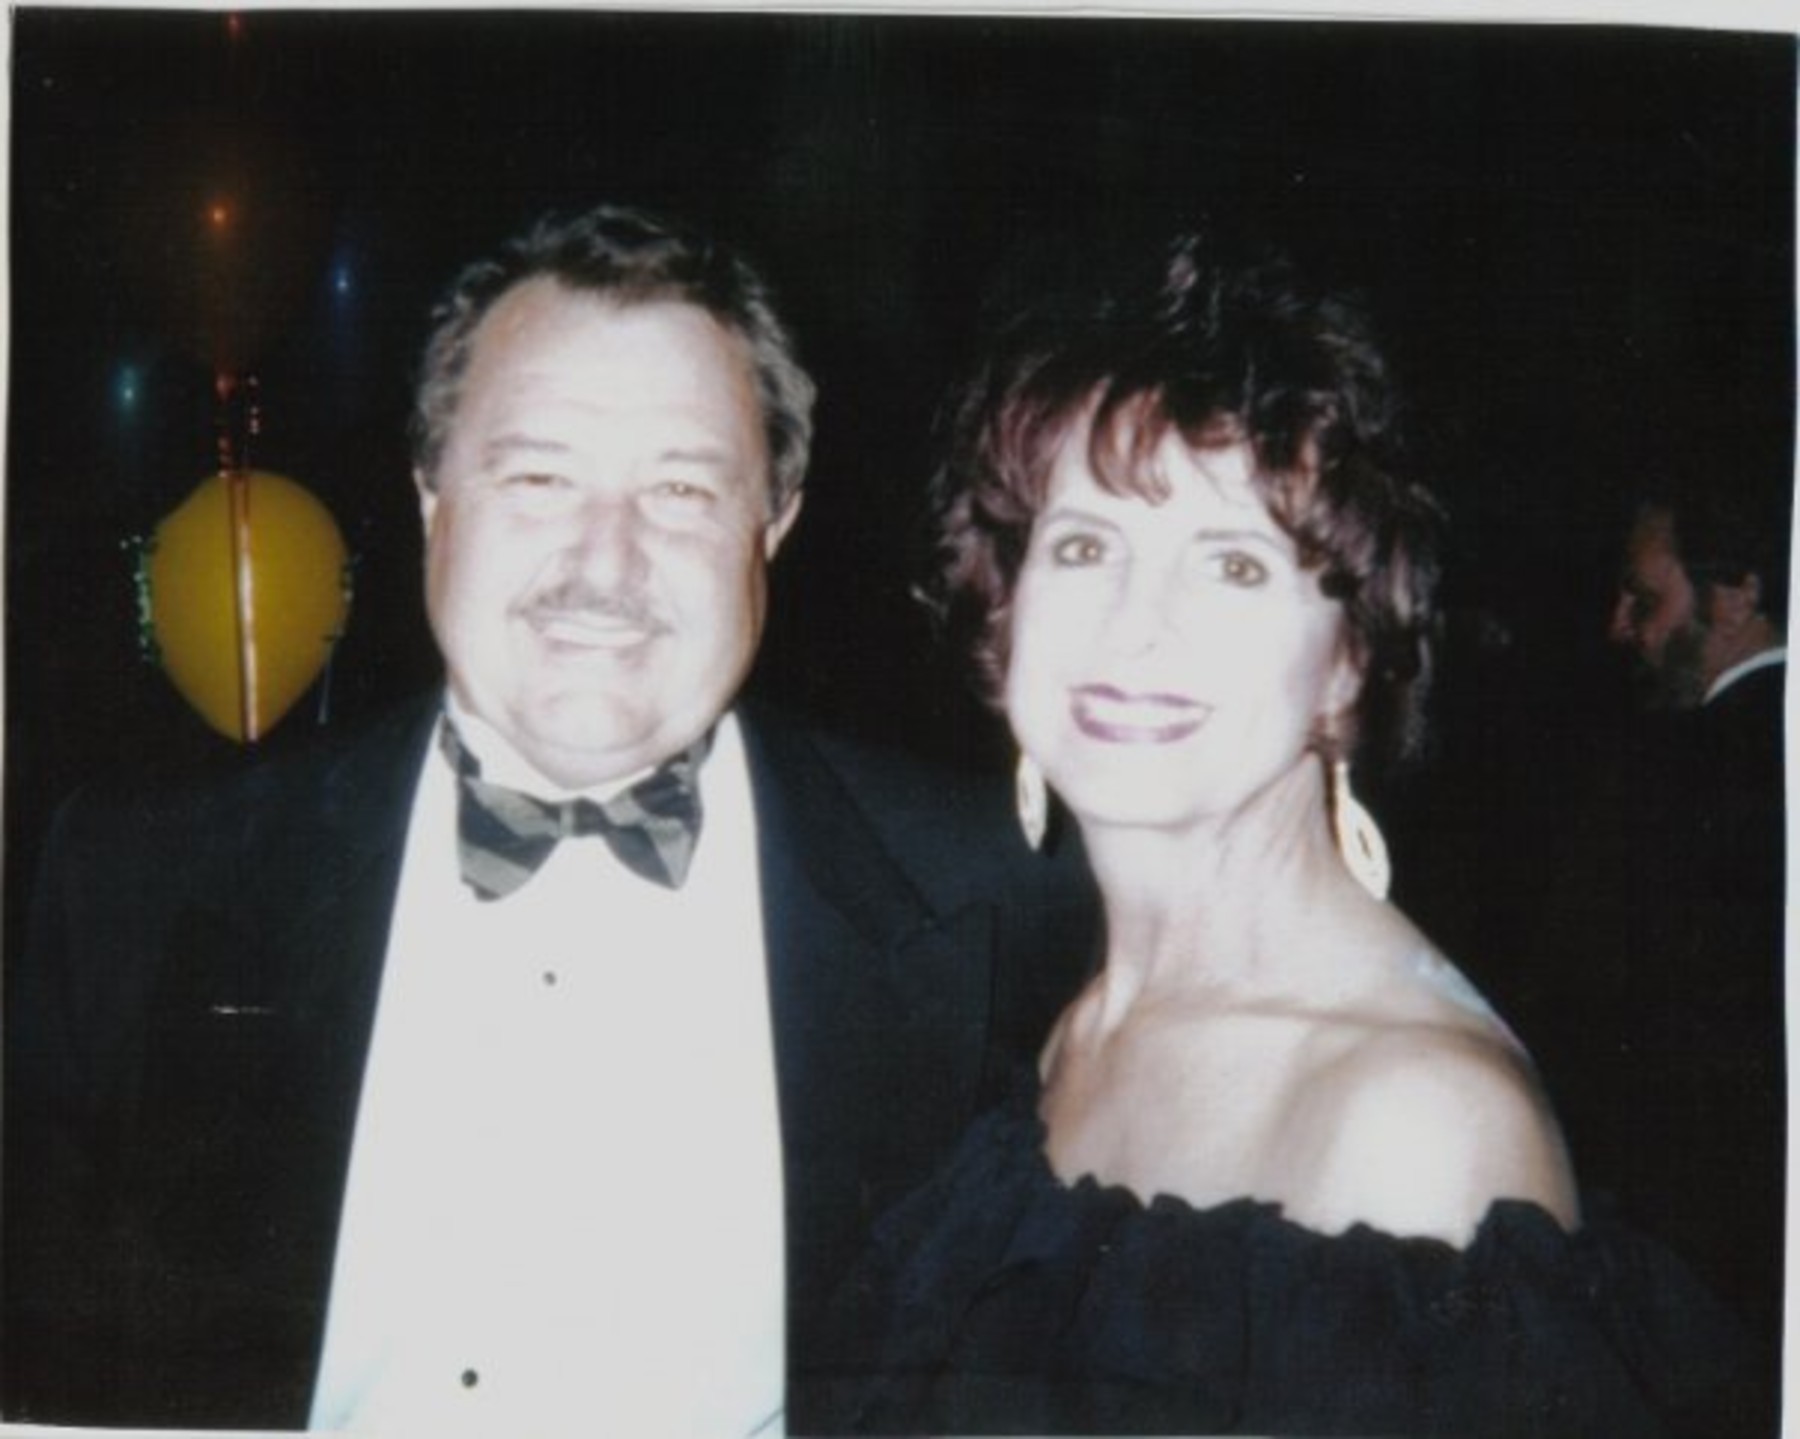 Jerry & Dessie at Gala, Tomball, TX - 1998